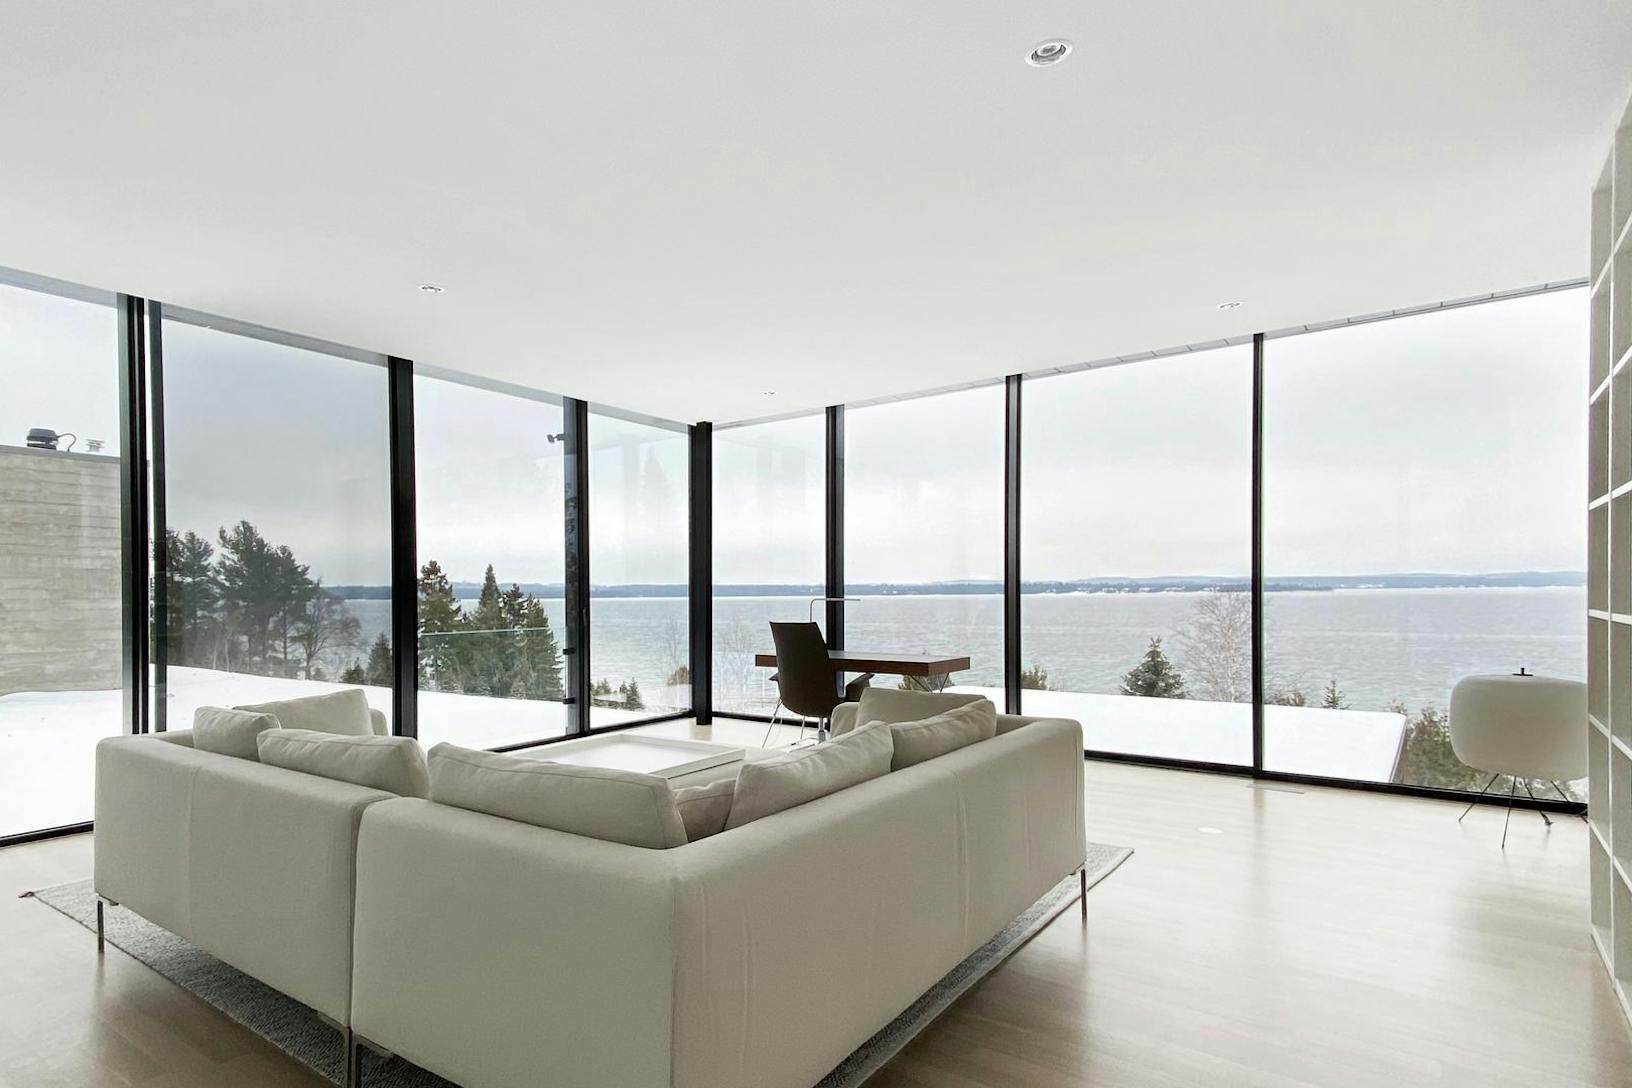 A living room with a large extreme weather conditions glass wall on both side of the room